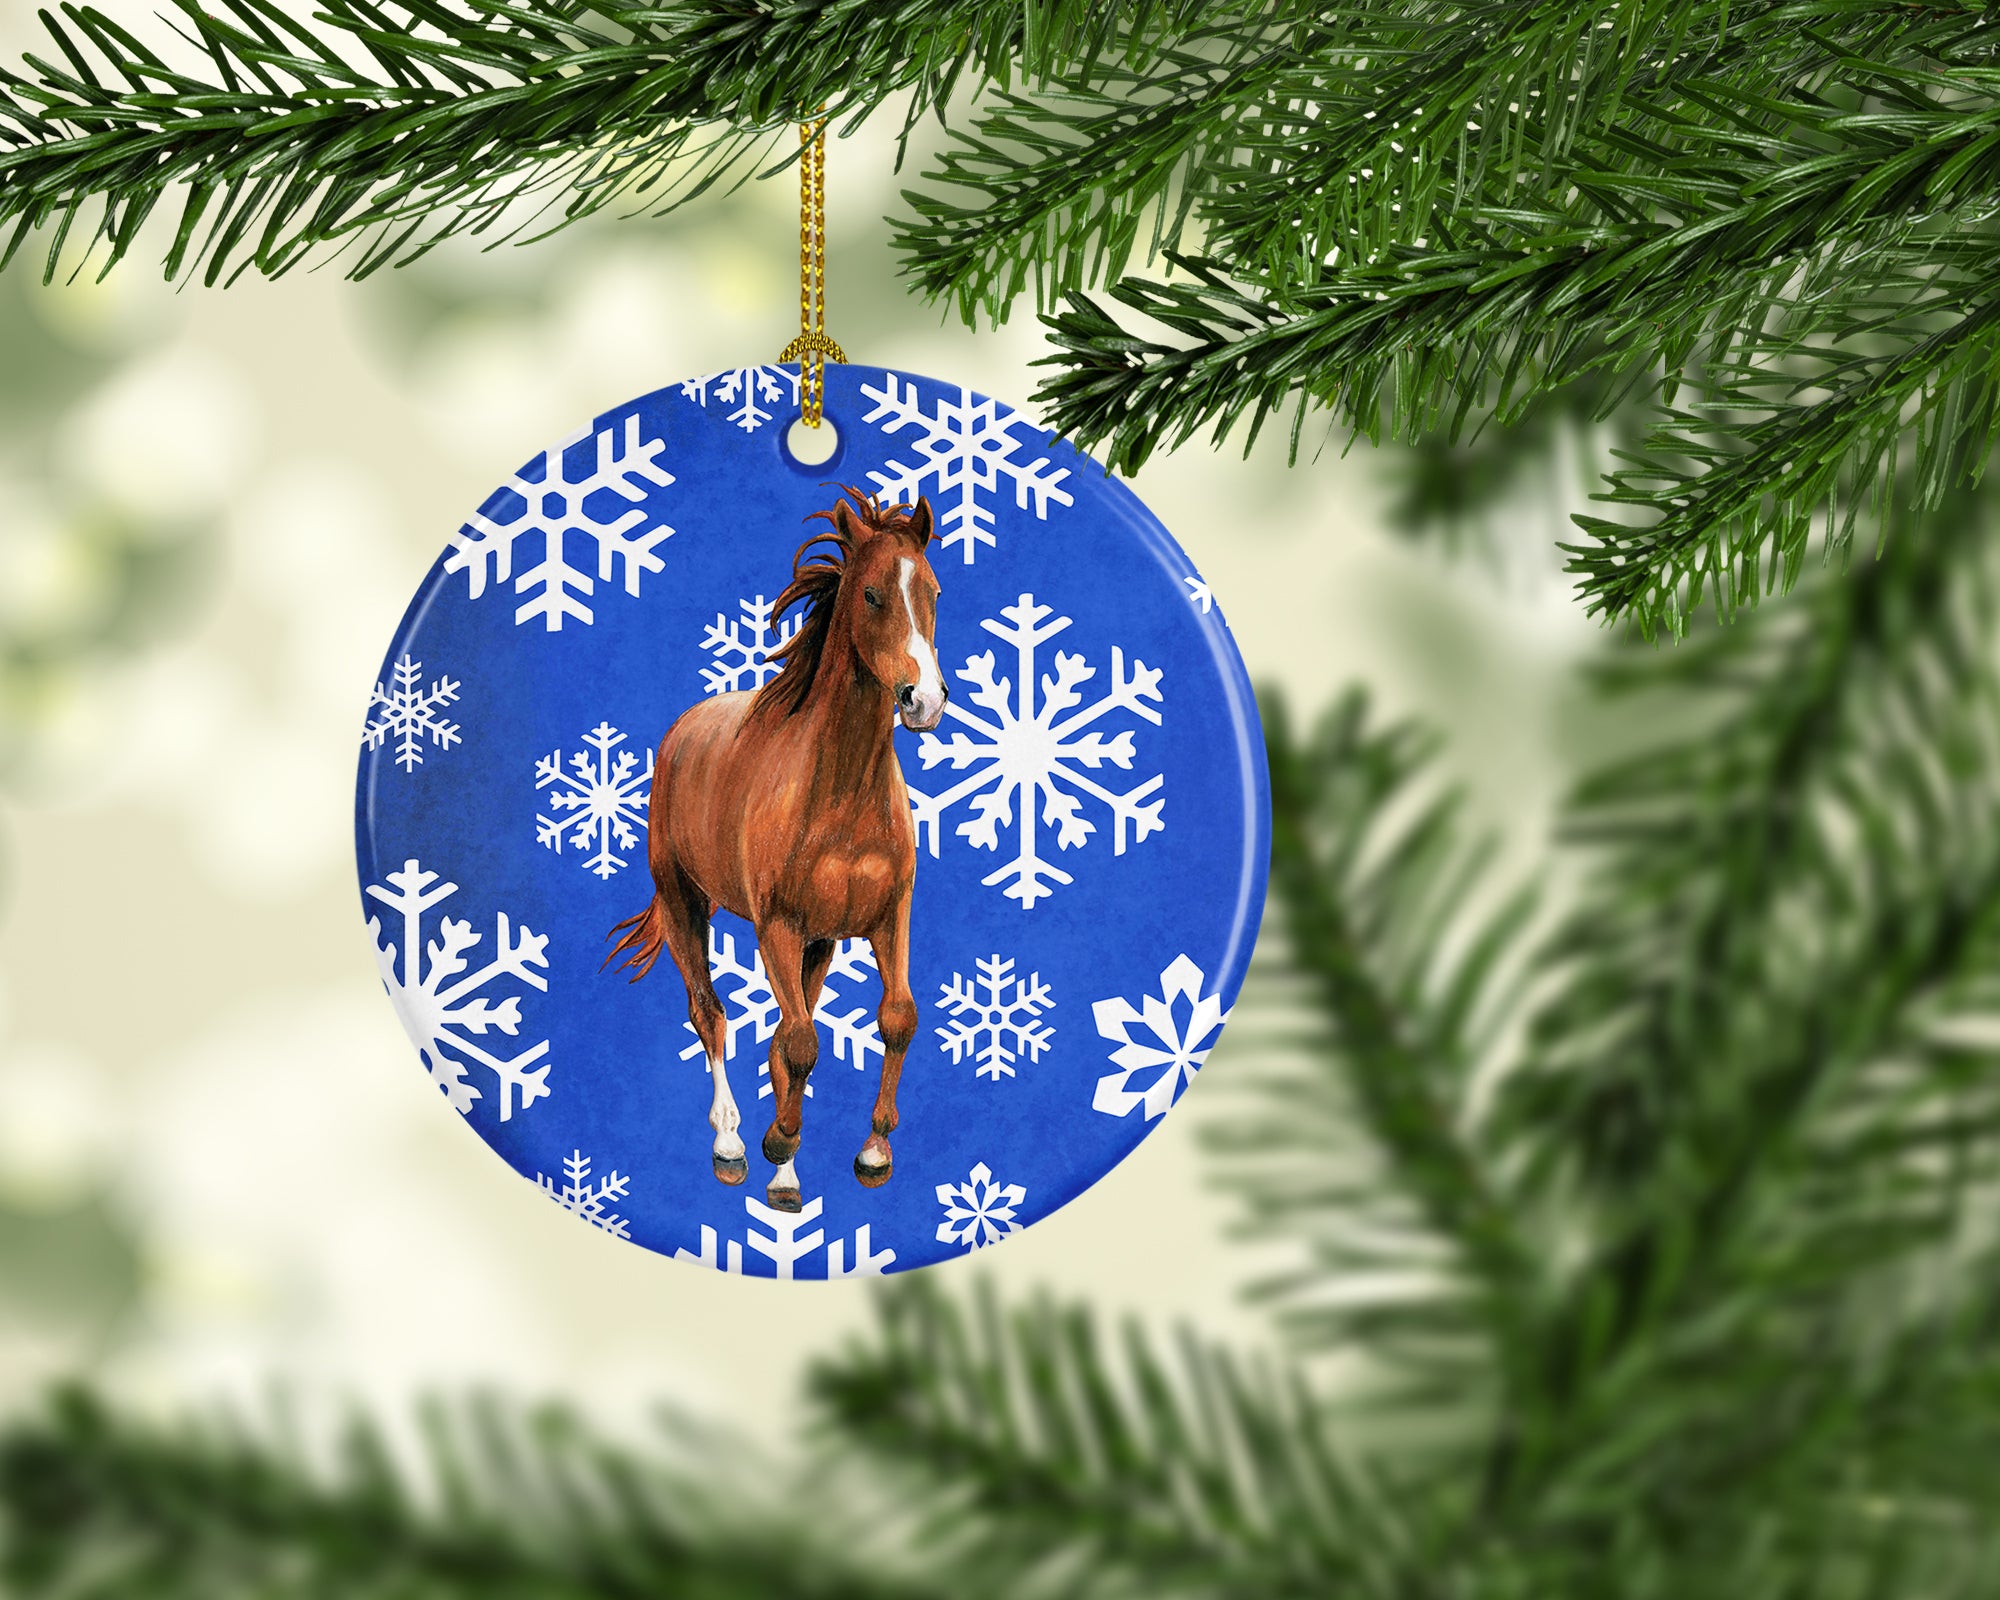 Horse Winter Snowflakes Holiday Ceramic Ornament SB3150CO1 - the-store.com